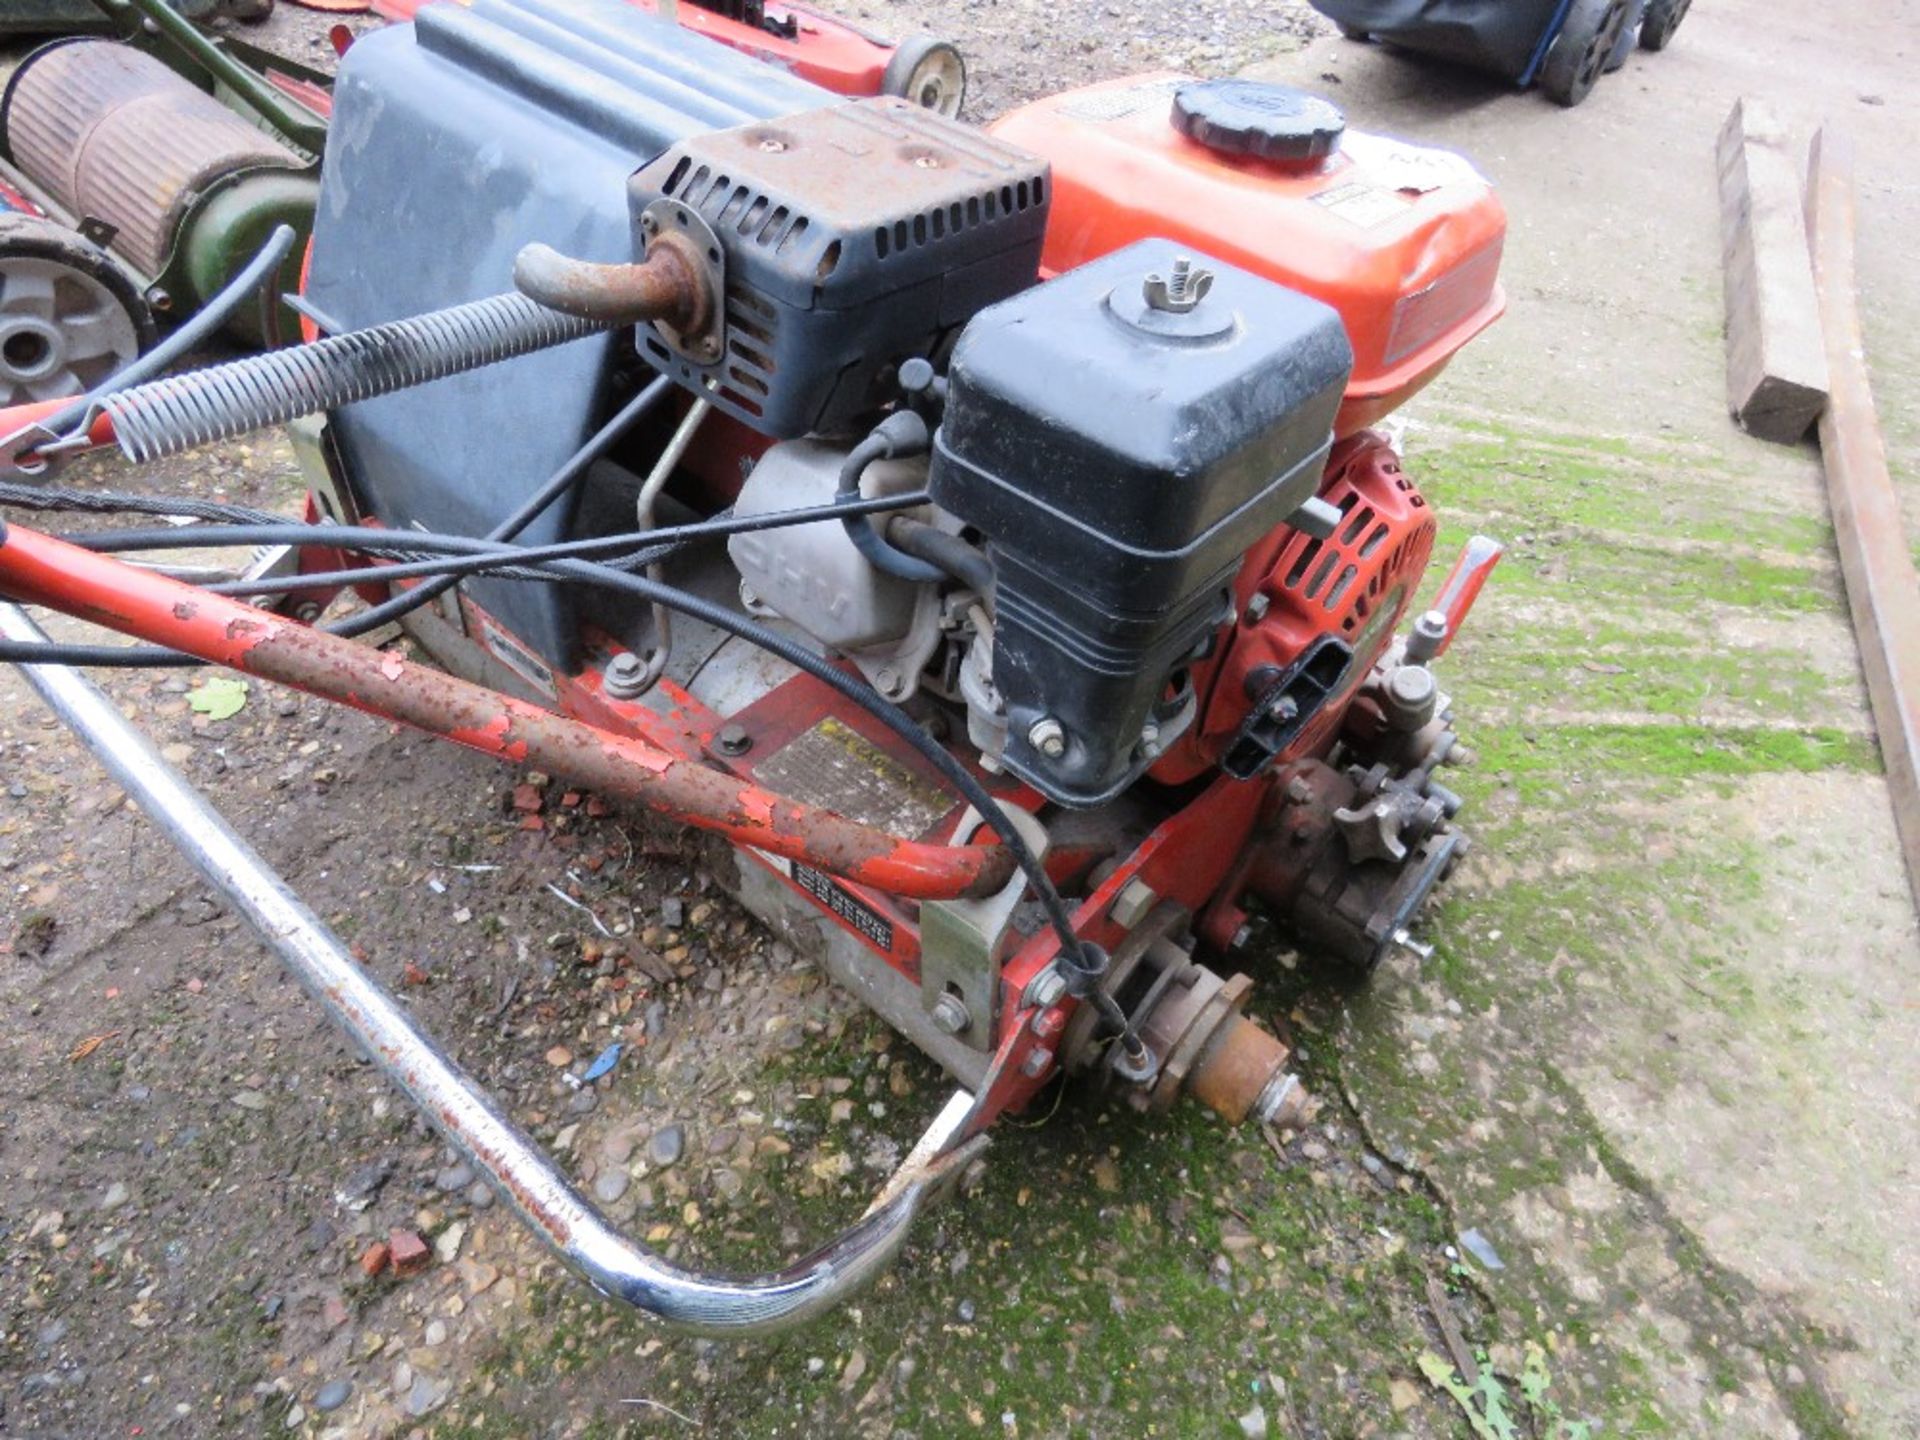 JACOBSEN PETROL ENGINED GREEN KING 522 CYLINDER LAWN MOWERN HONDA ENGINE, NO BOX. THIS LOT IS SOL - Image 4 of 6